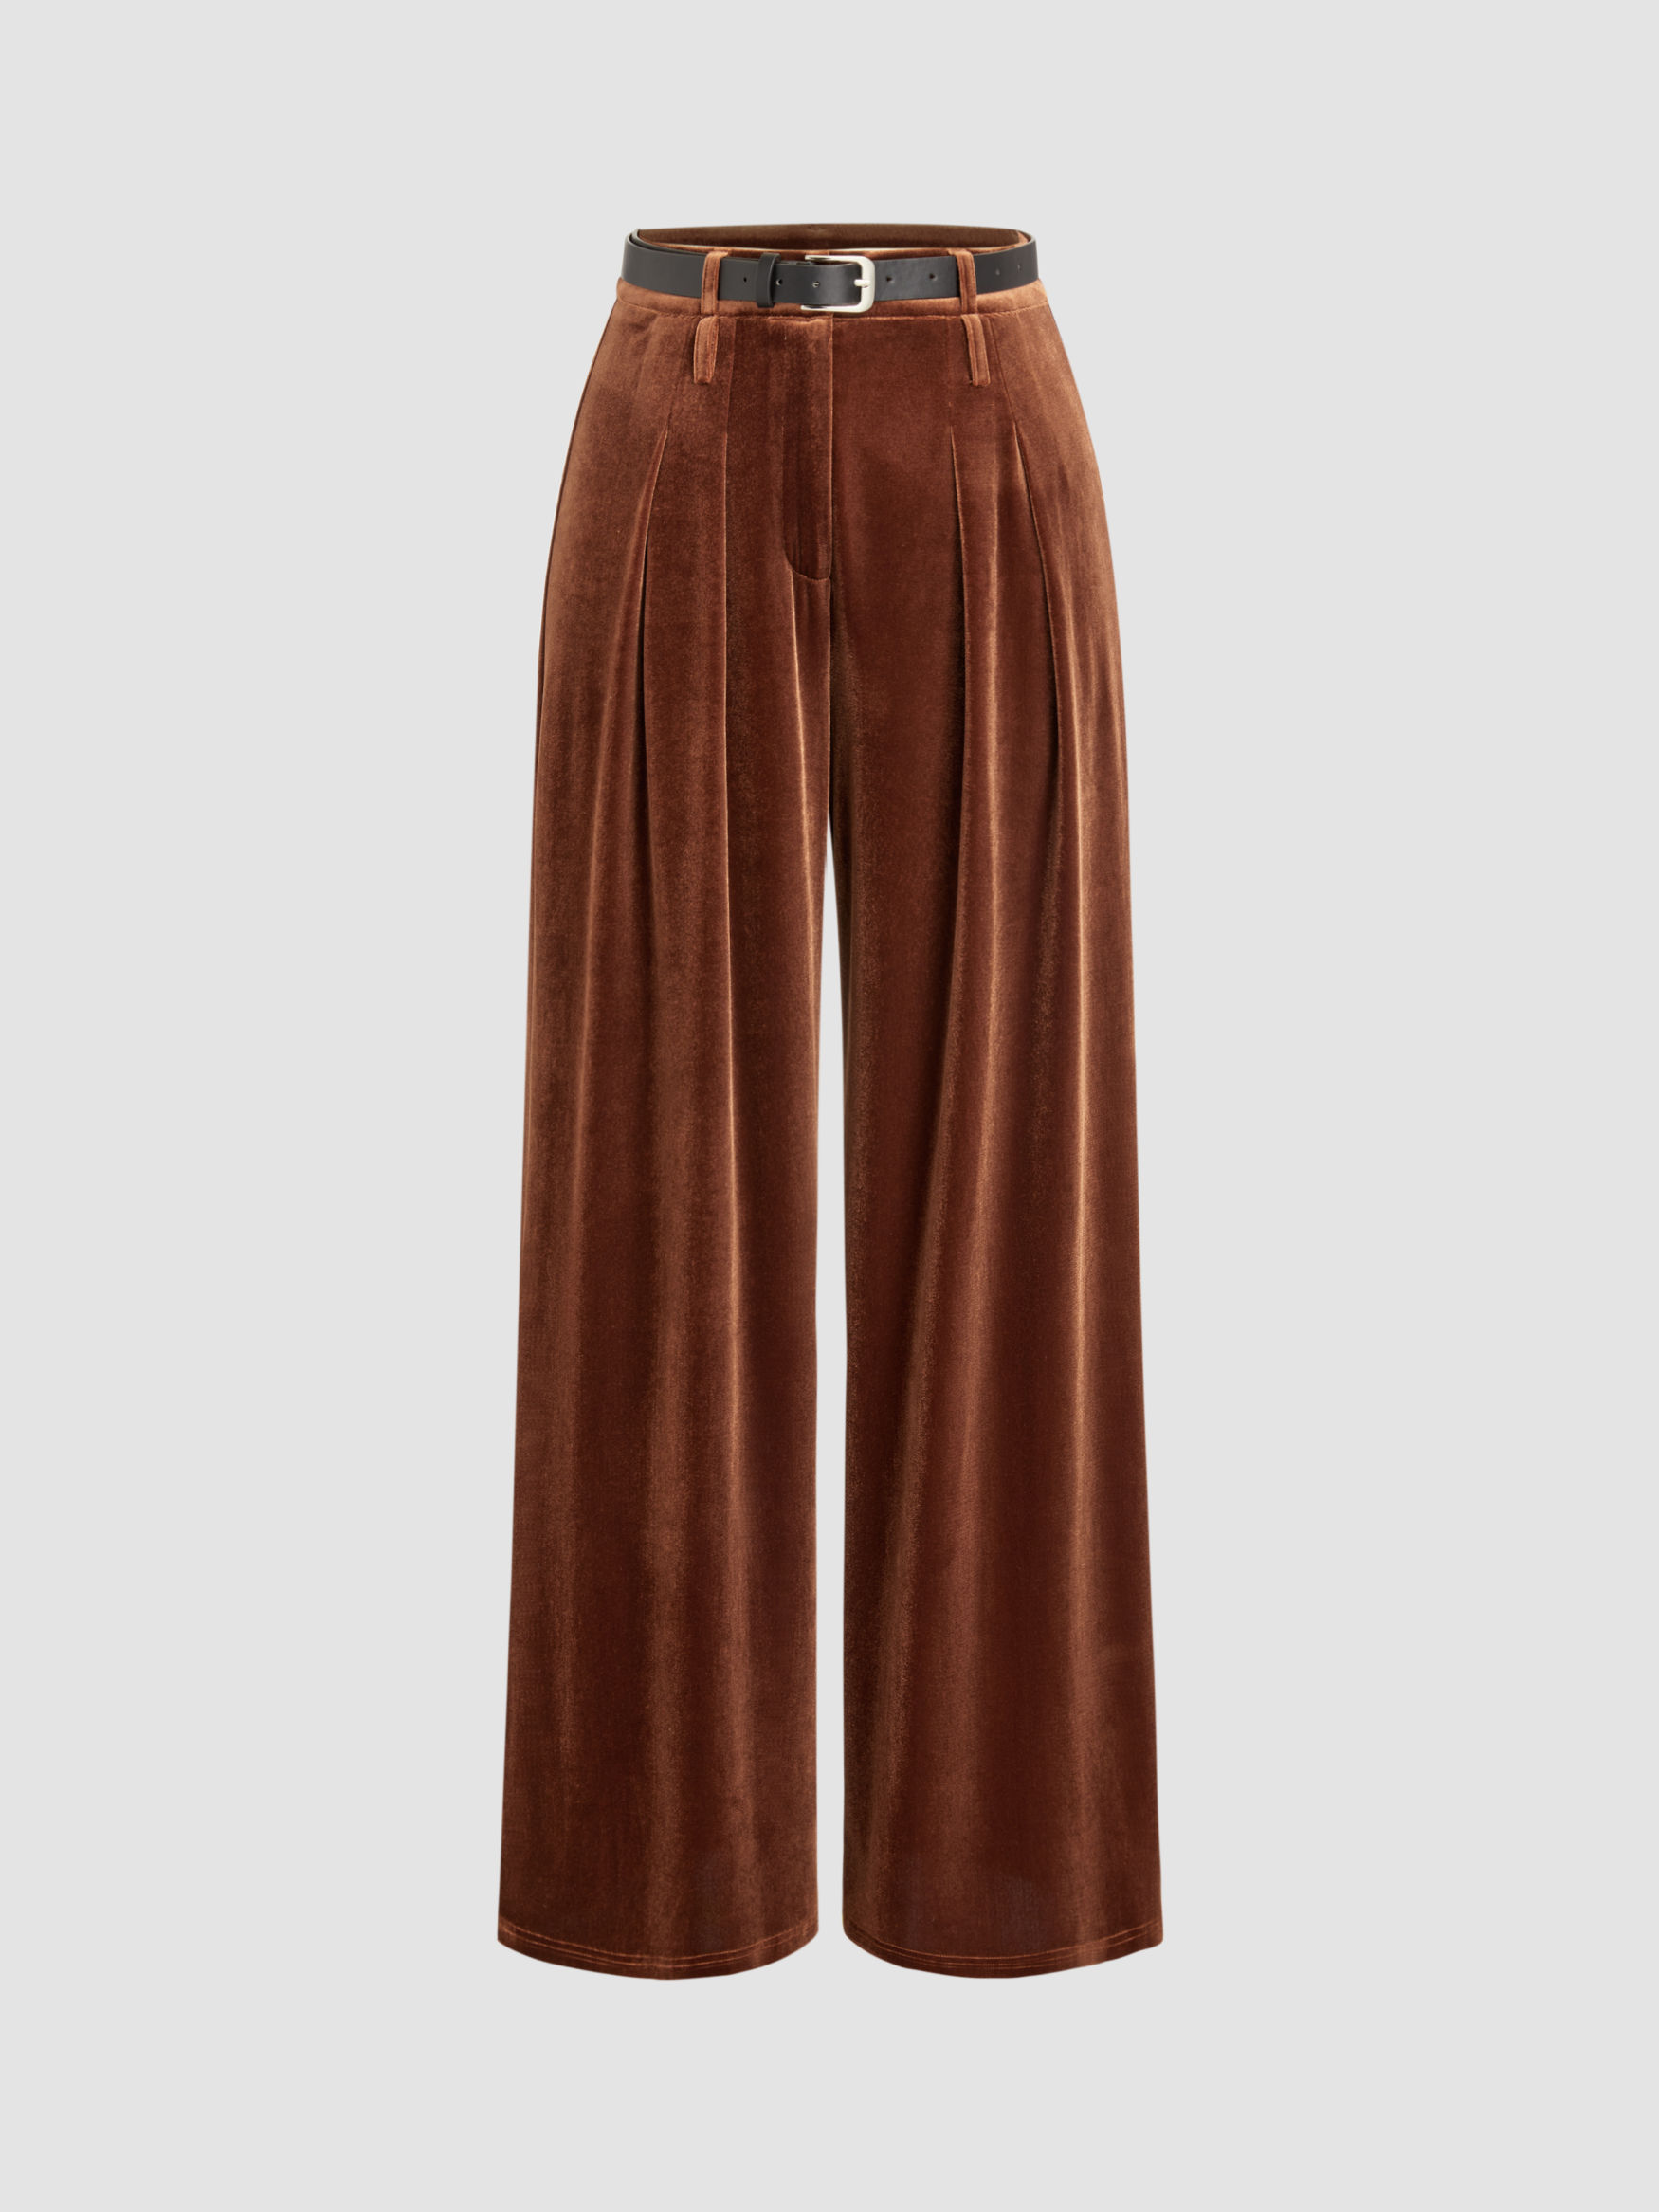 1930s Women’s Pants, Trousers, and Beach Pajamas History   AT vintagedancer.com